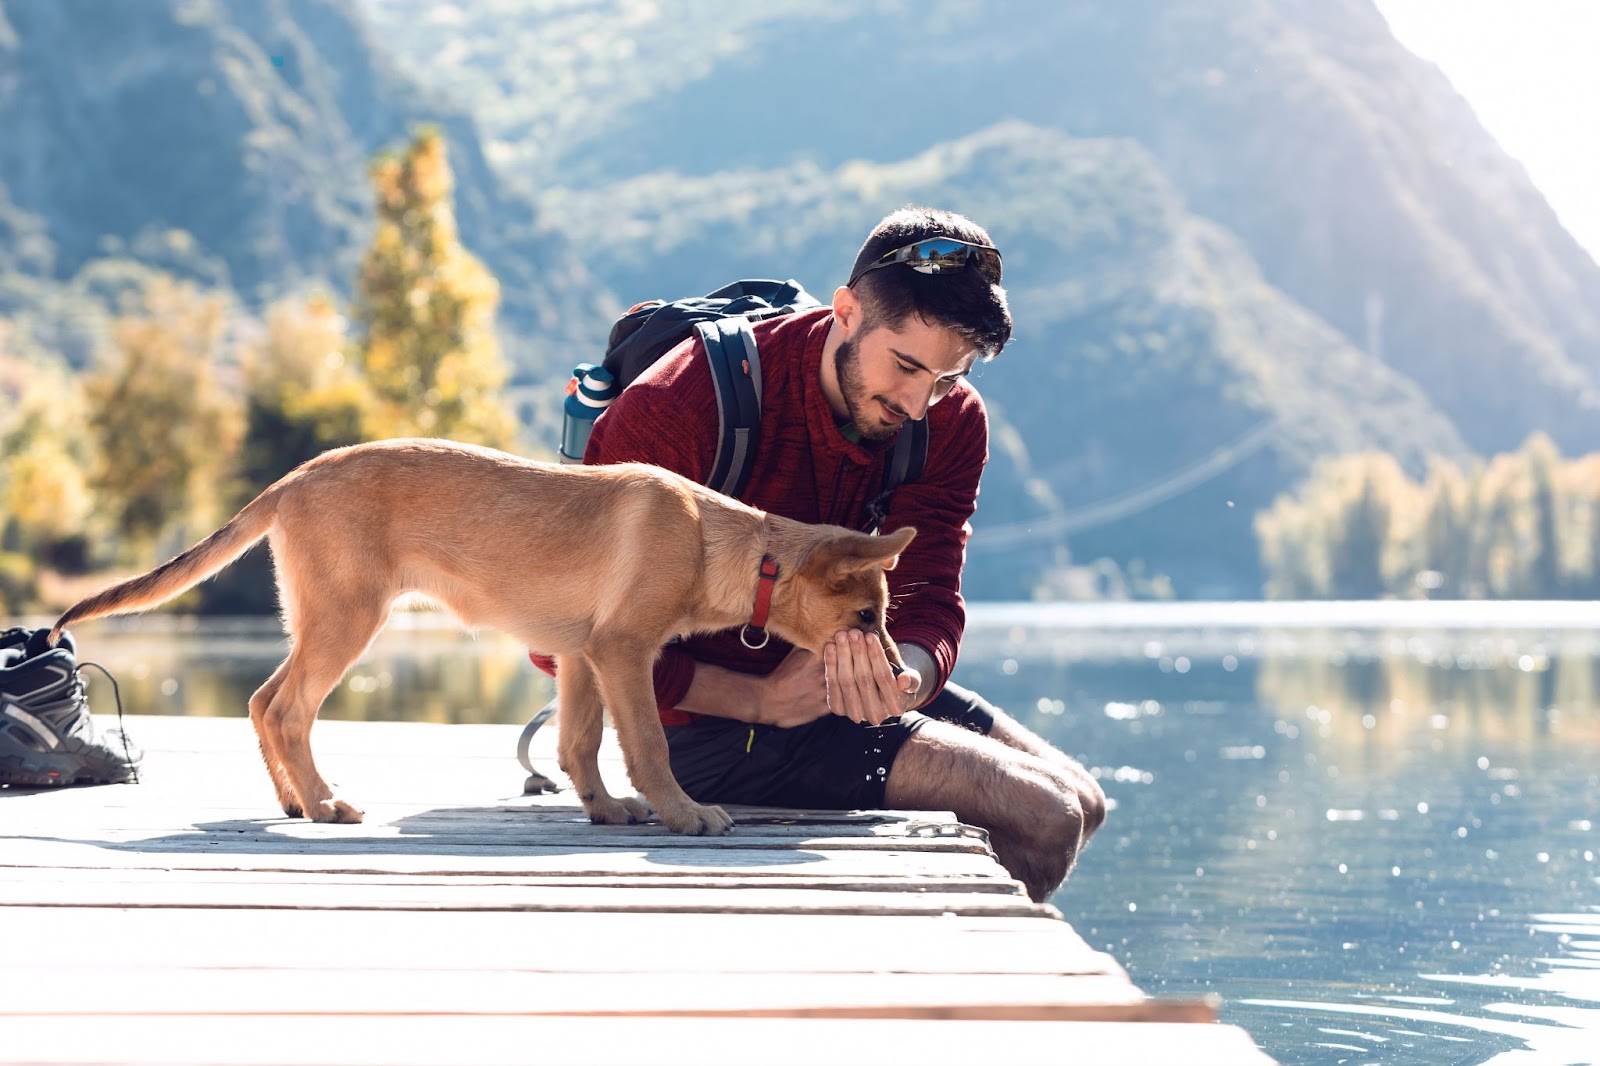 Man ensuring dog's safety by petting it on a dock during outdoor activity